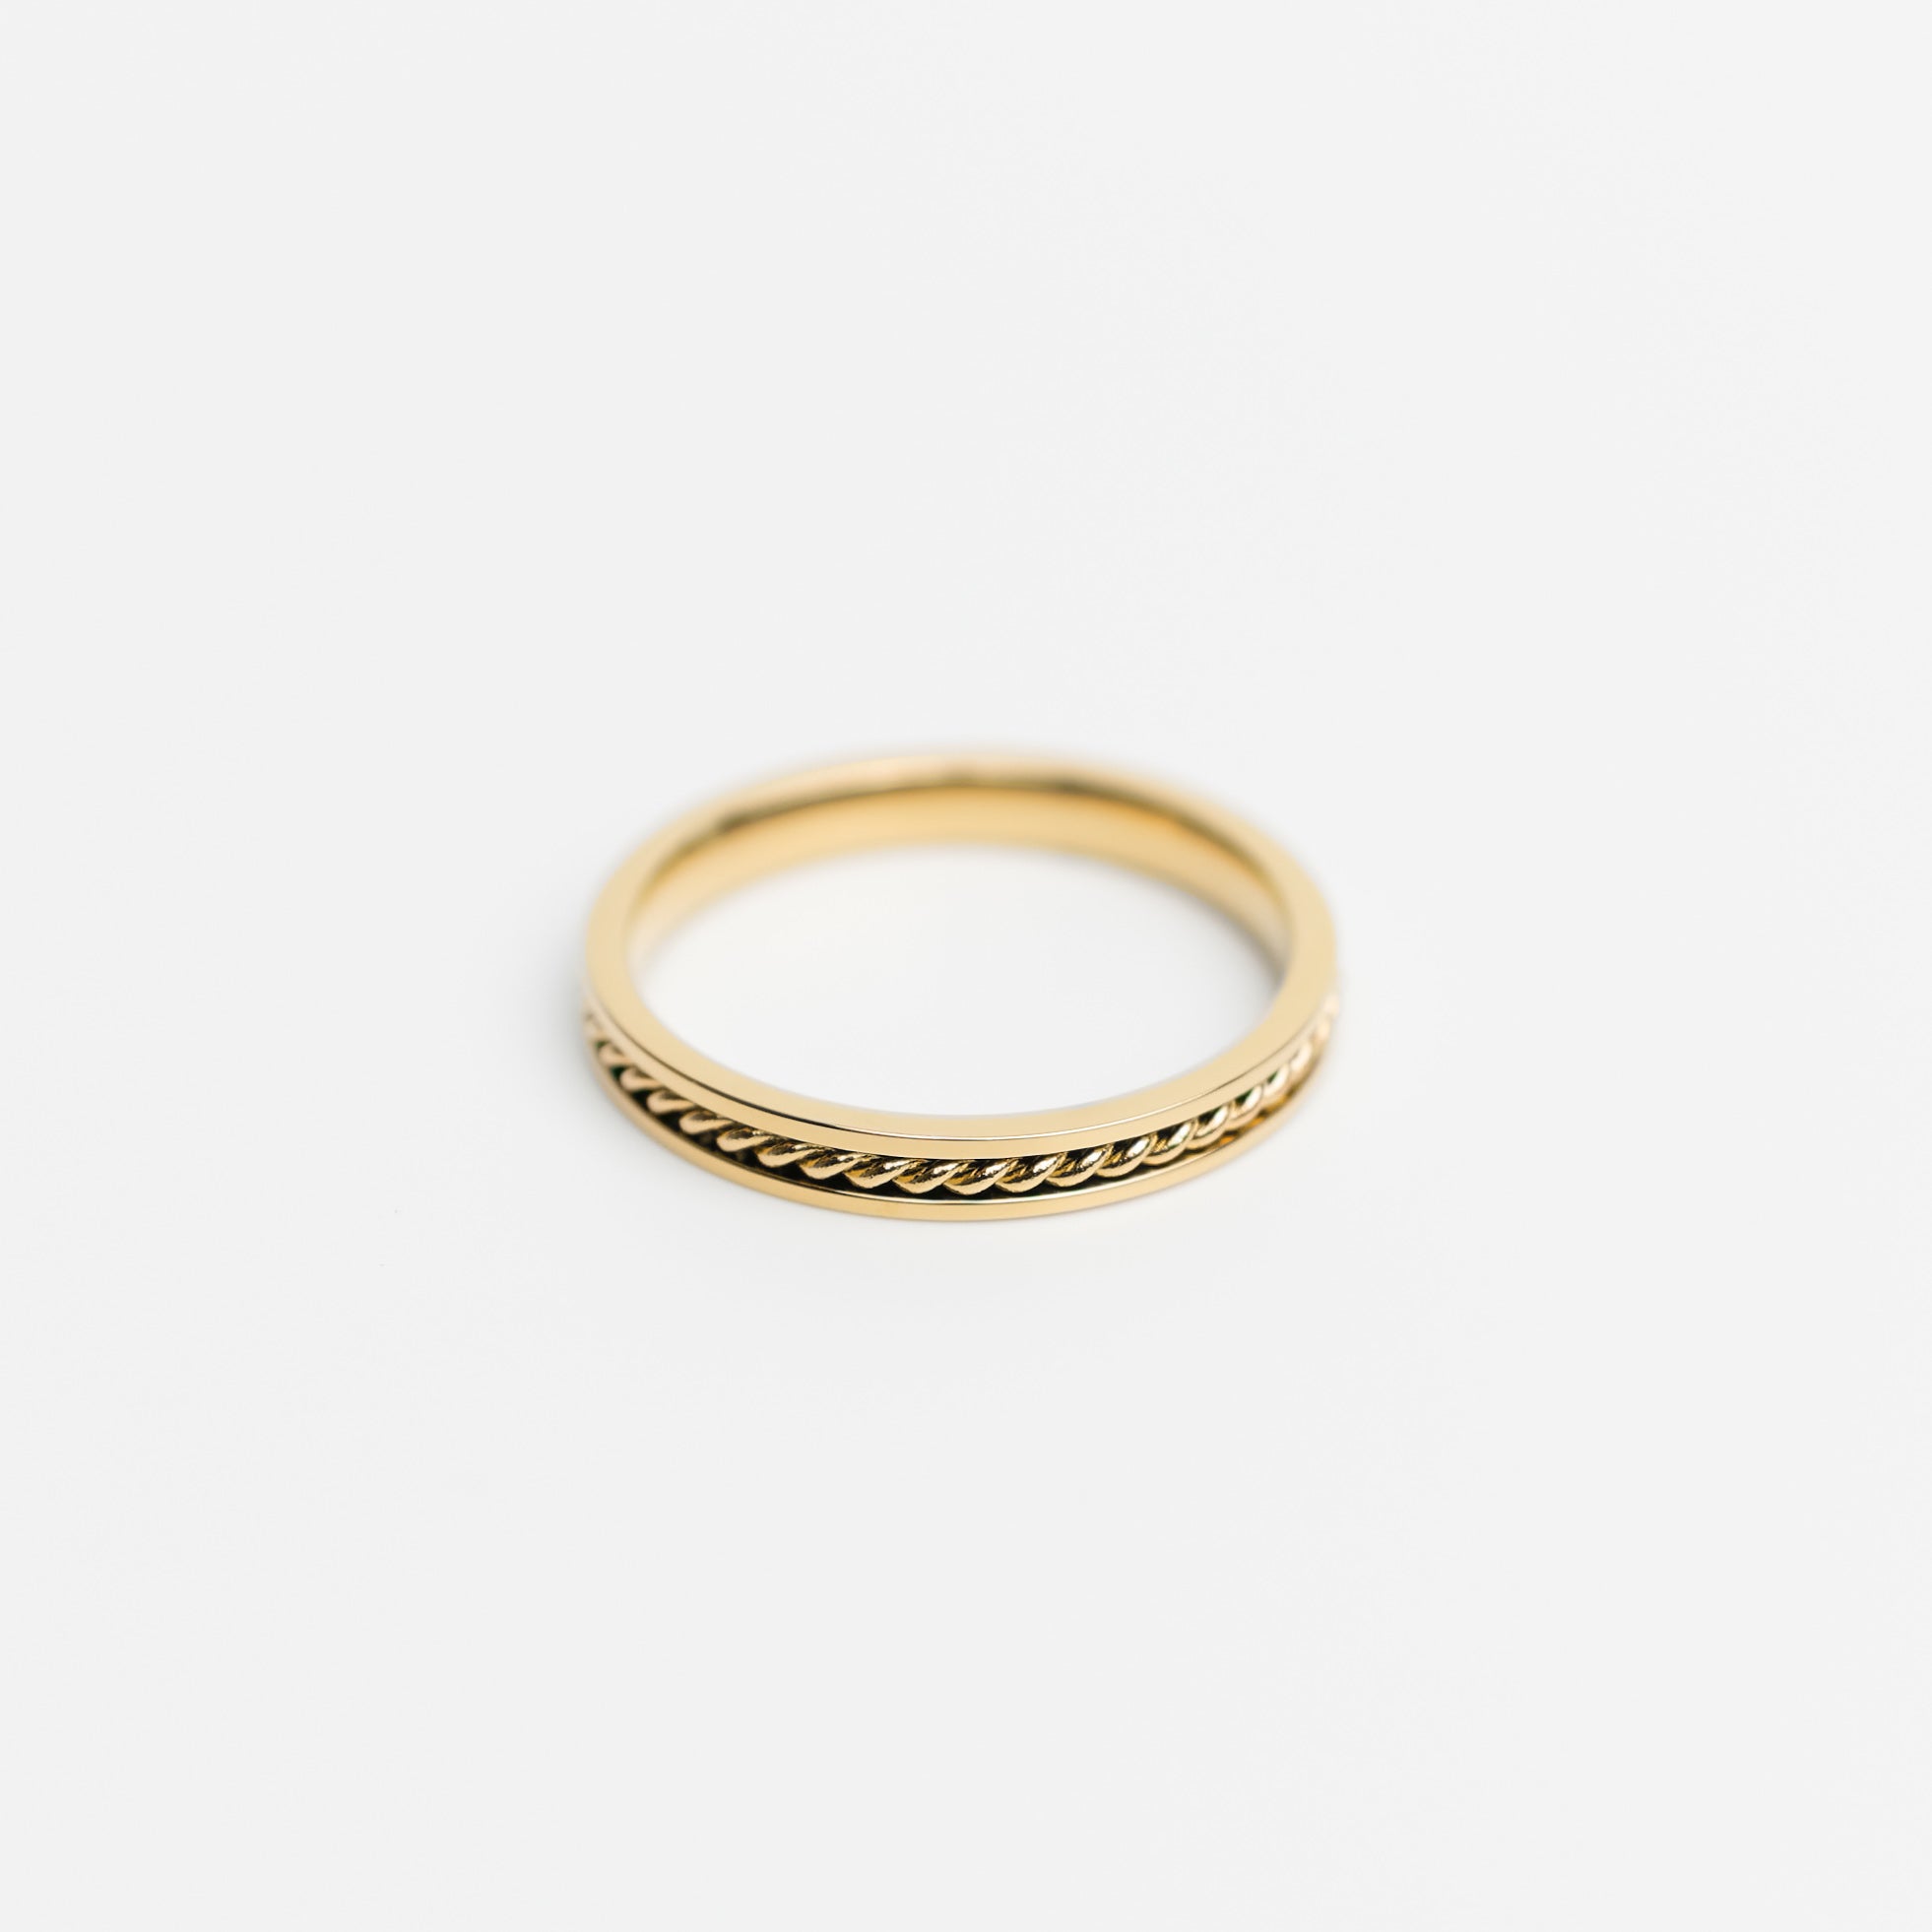 Rº4 - Stainless Steel 18K gold plated ring - Zafeer